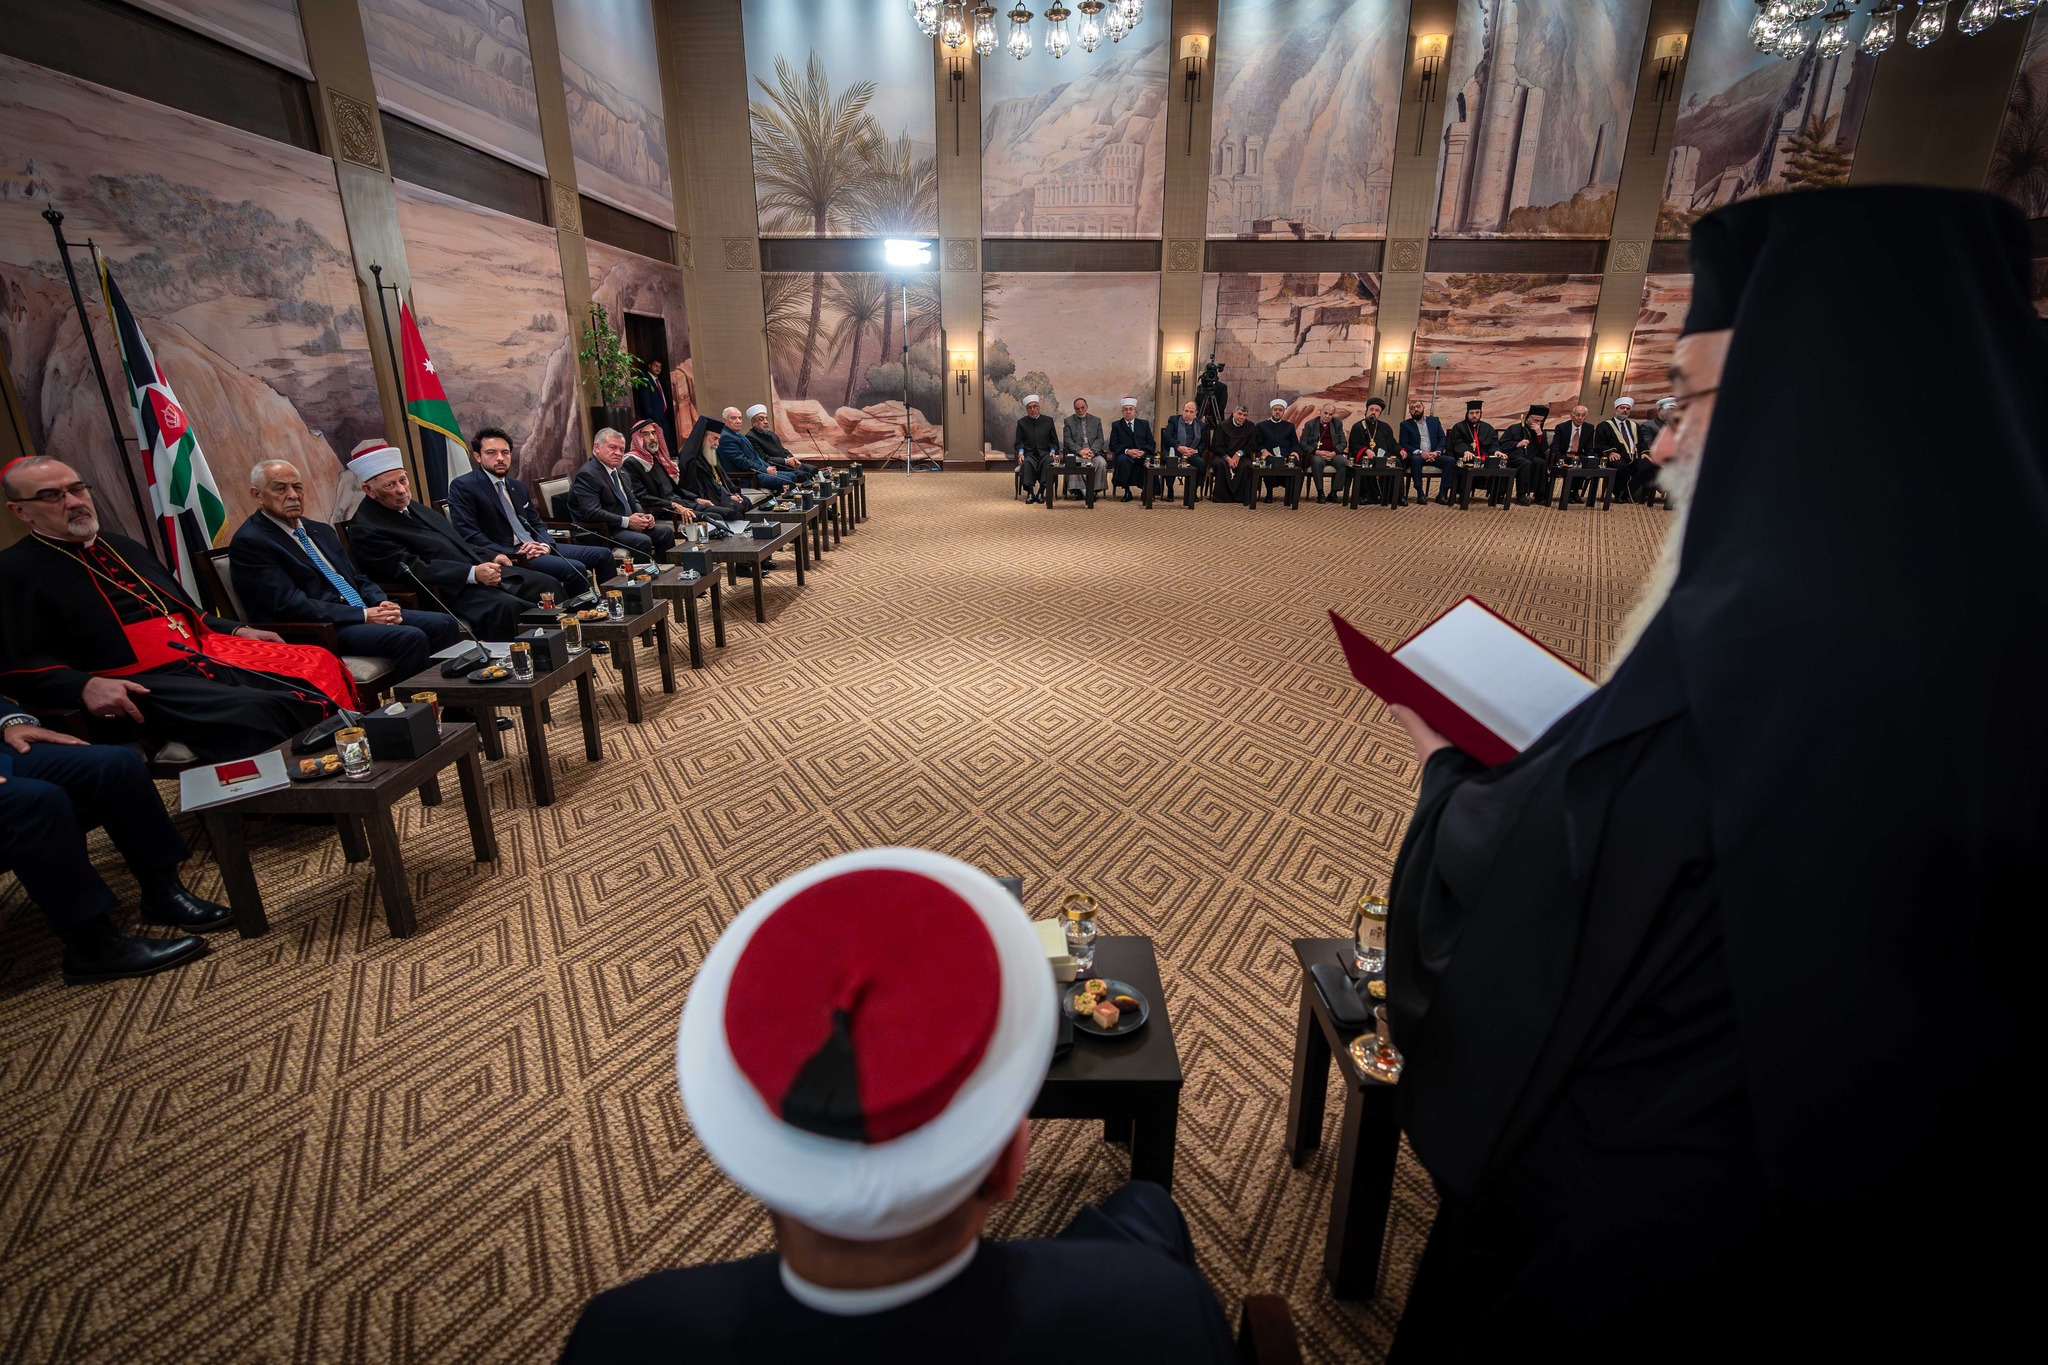 Interfaith Leaders Unite with King of Jordan for Ceasefire and Shared Peace in Jerusalem